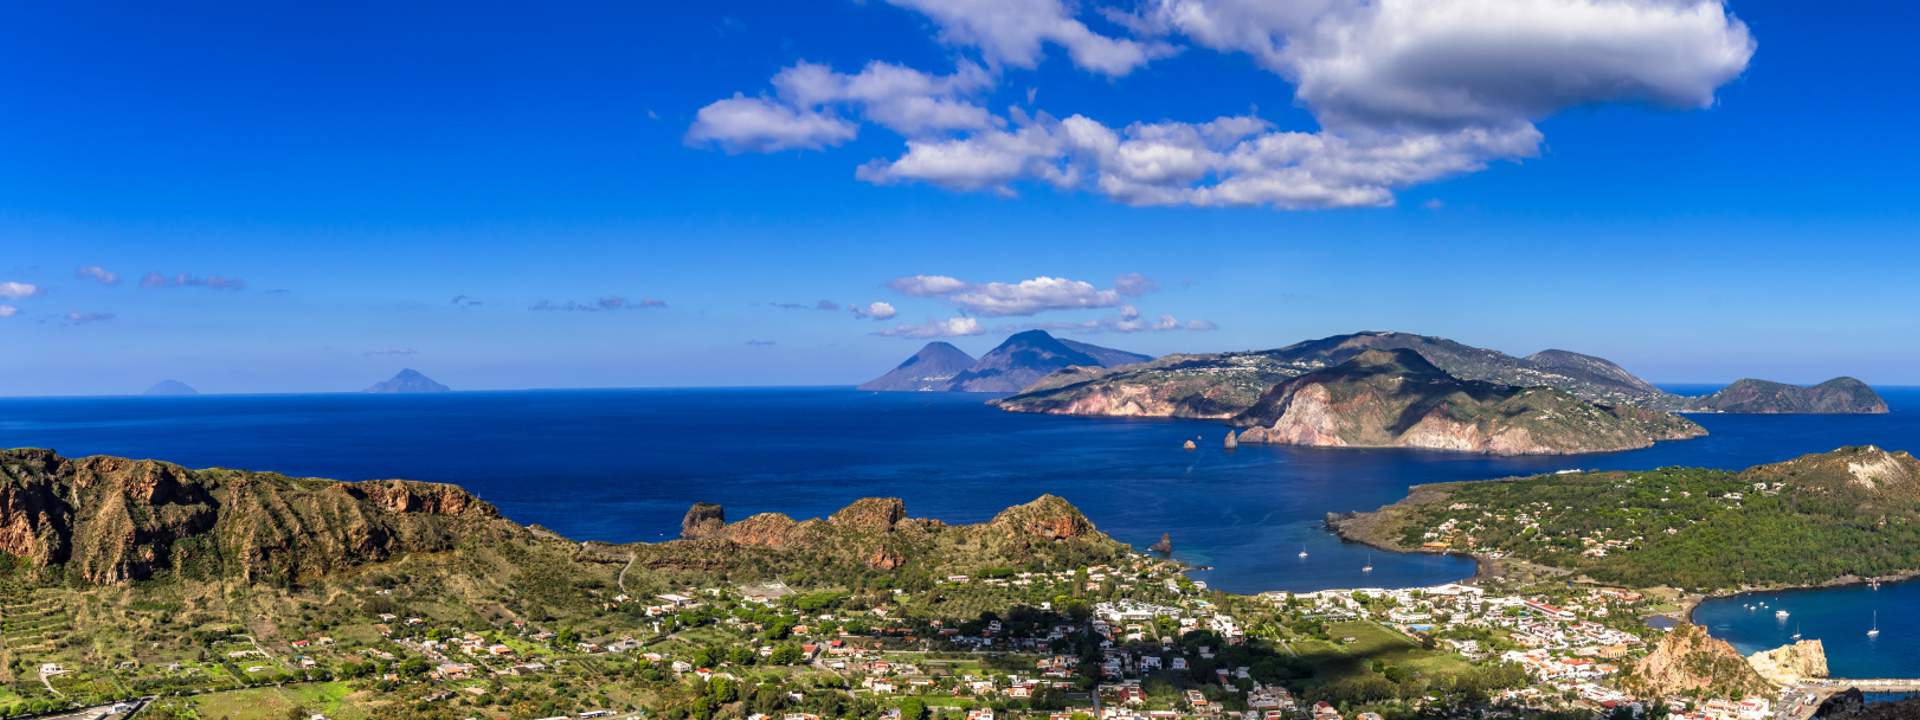 Discover Sicily - Cabin cruise on board a gulet